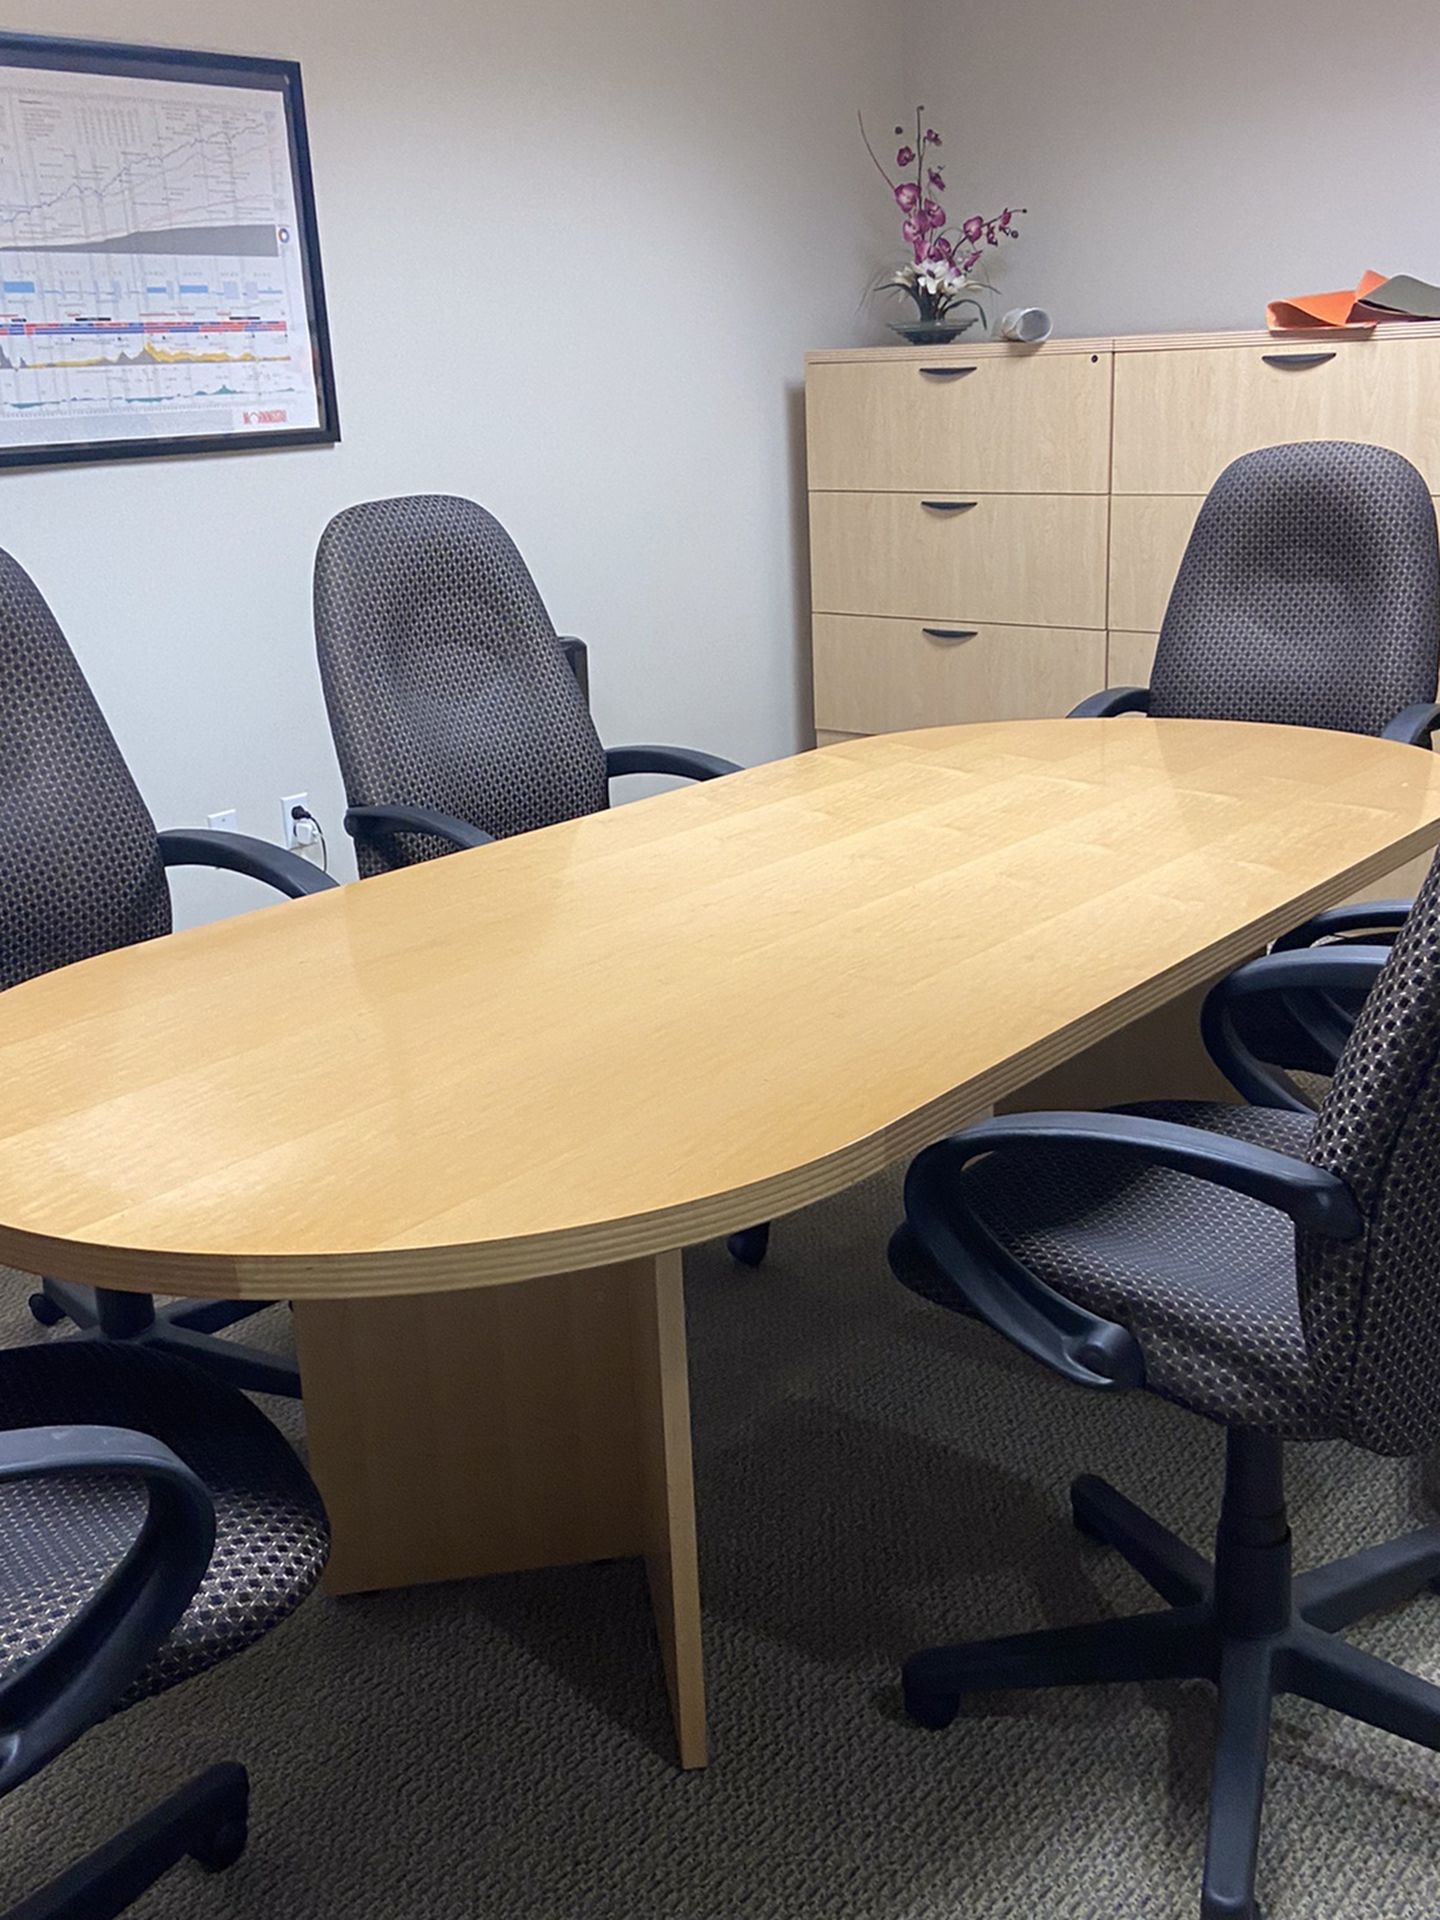 90” X 43” “racetrack” Oval Conference Table. 2 “V” Shaped Legs. Indiana Furniture, Solid Wood,Clear Maple Finish. 8 Adjustable Chairs INCLUDED!